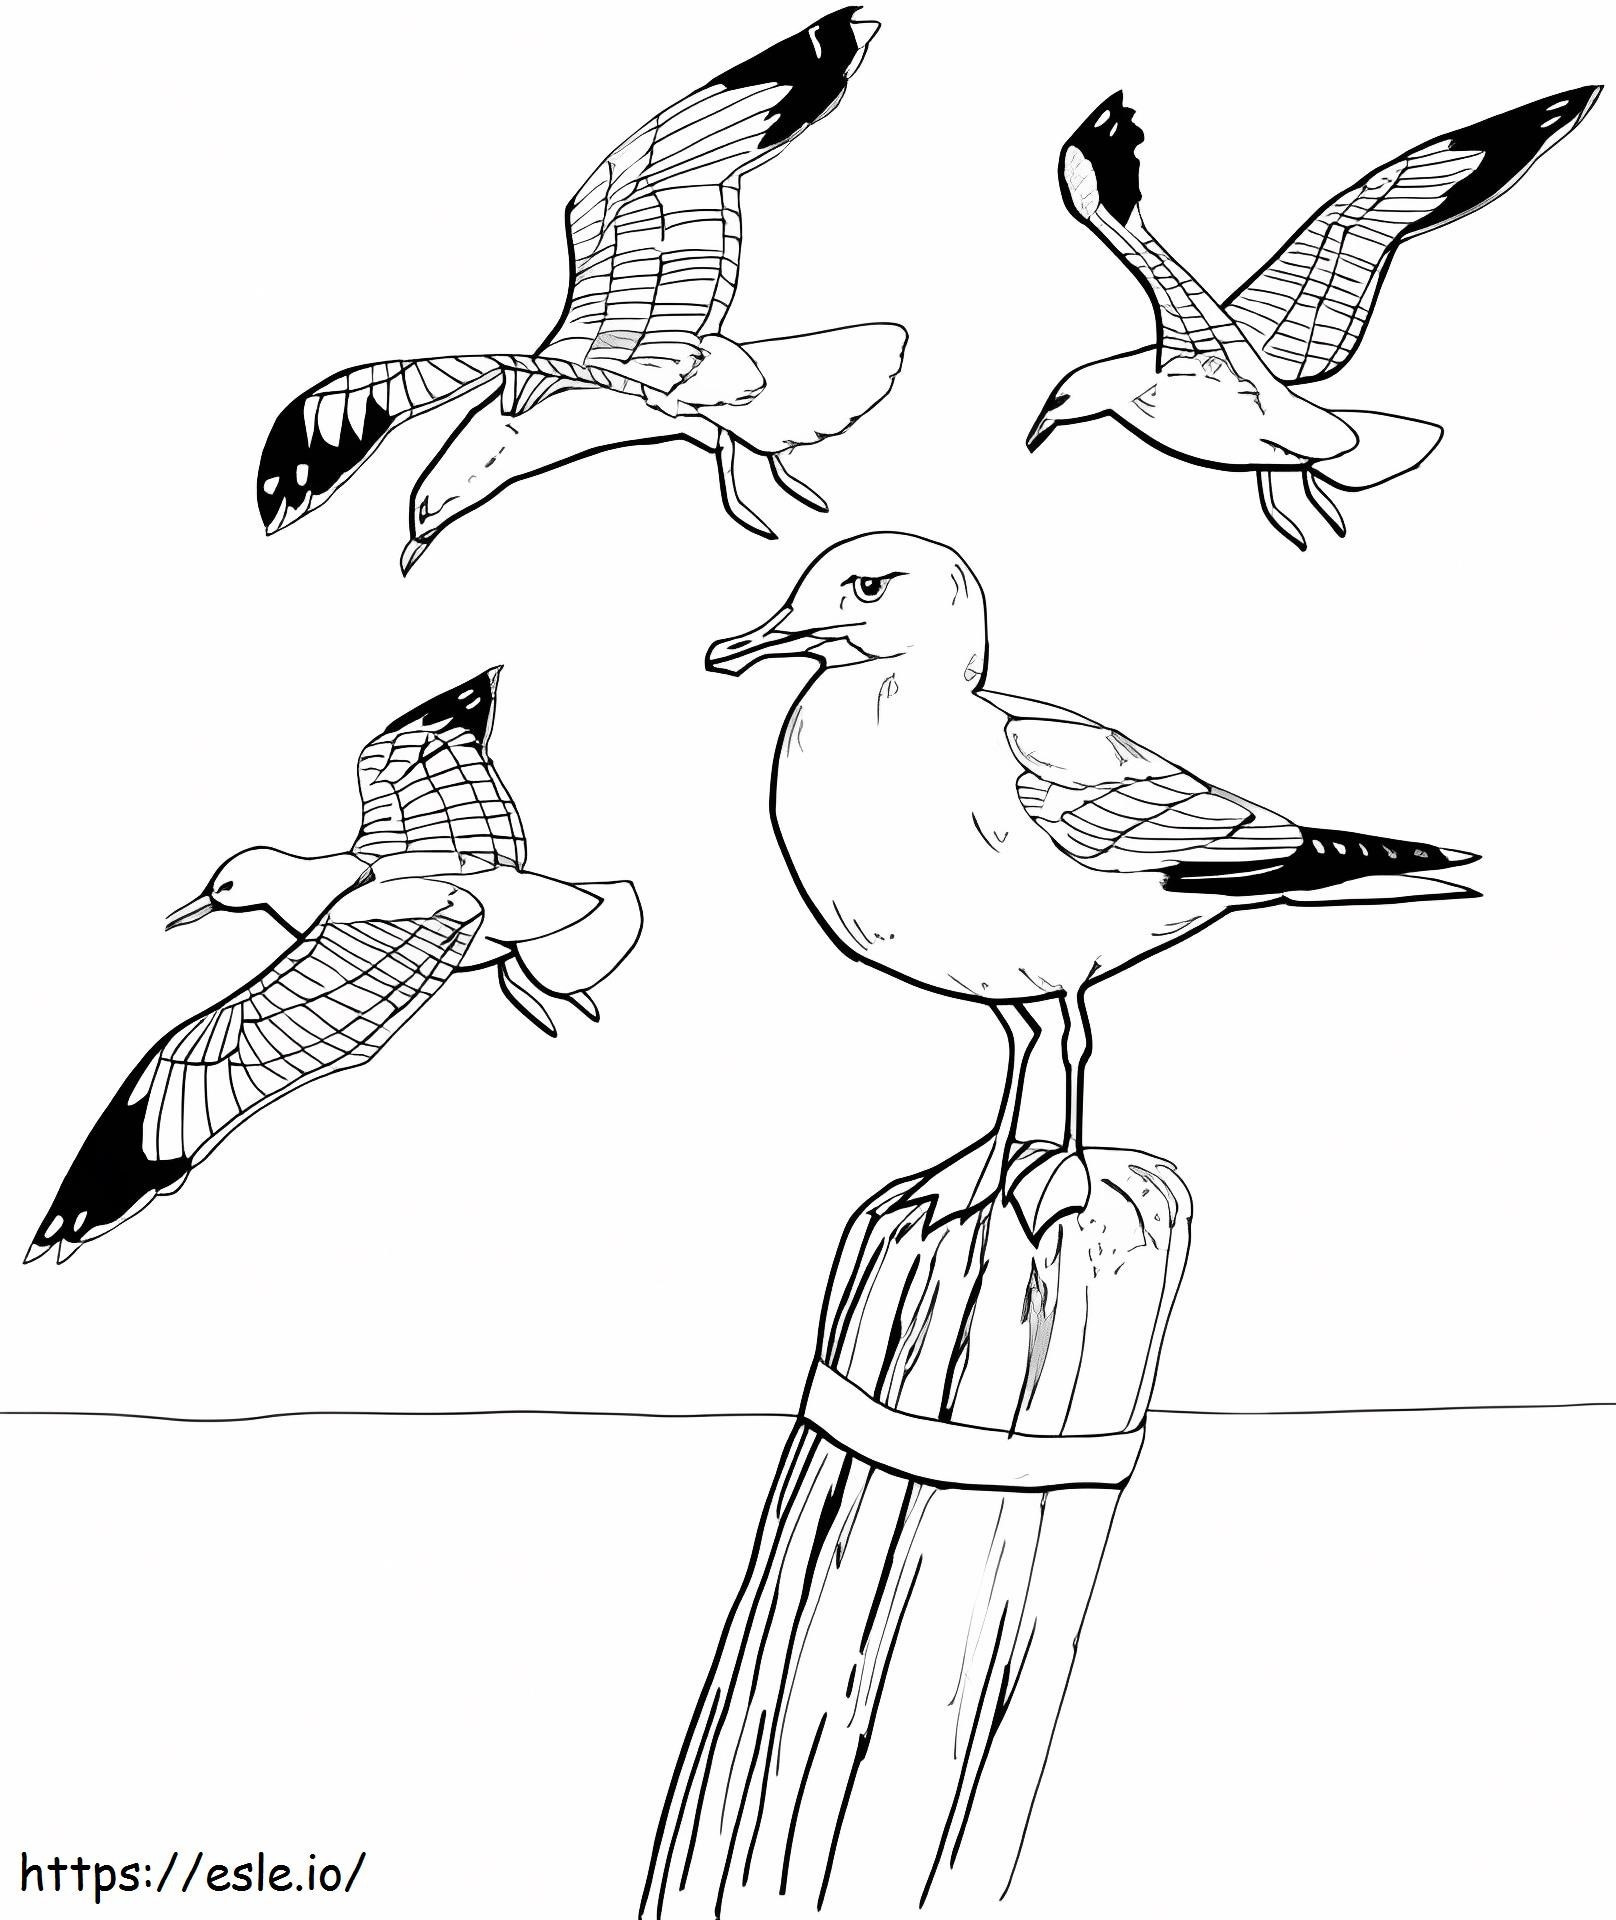 Four Seagulls coloring page